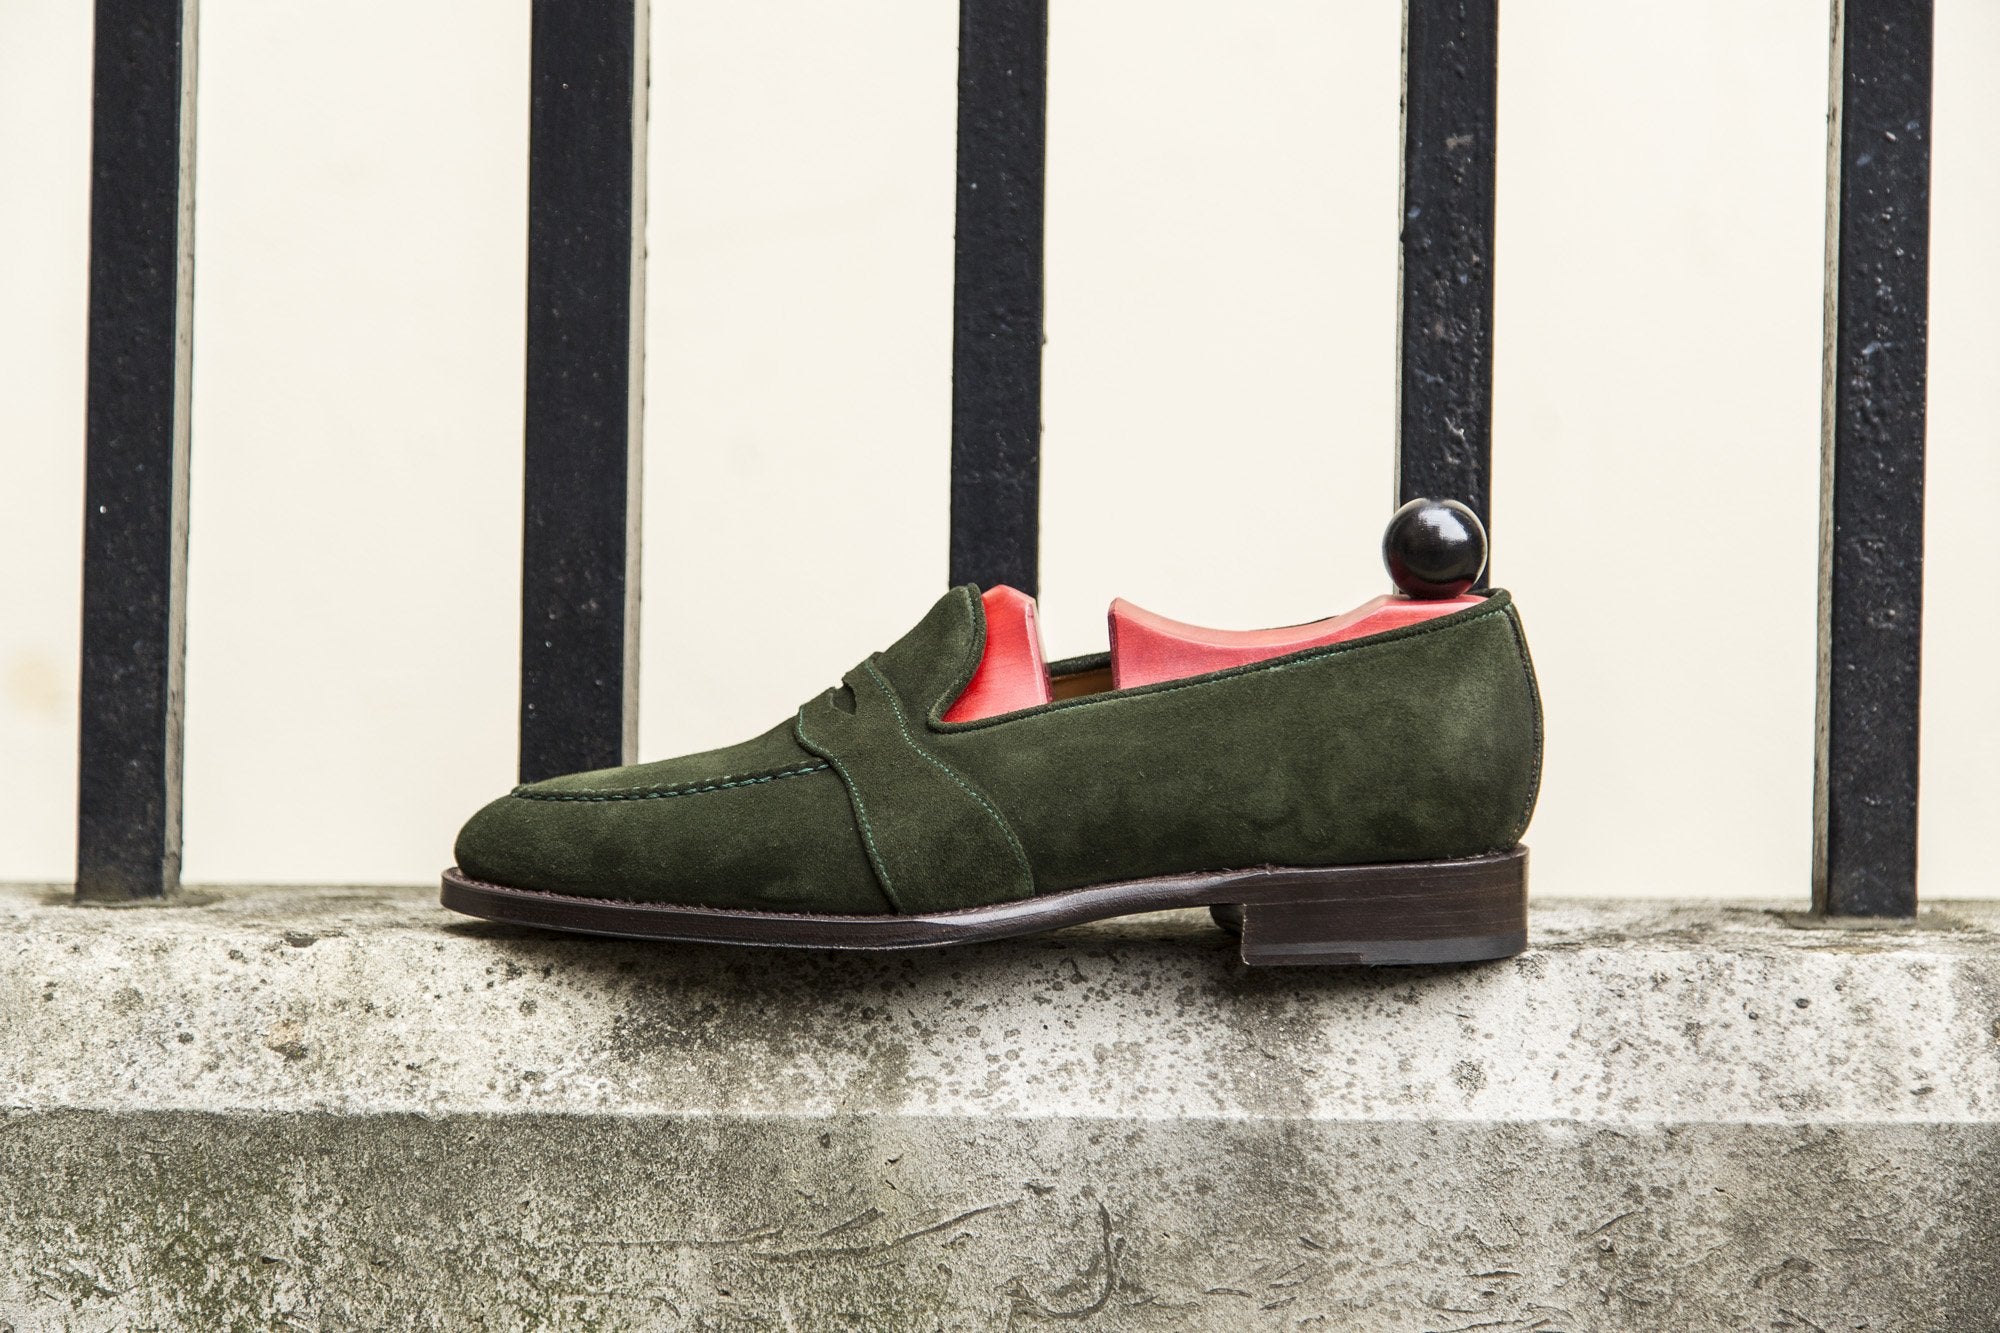 Madison - MTO - Forest Green Suede - TMG Last - Single Leather Sole